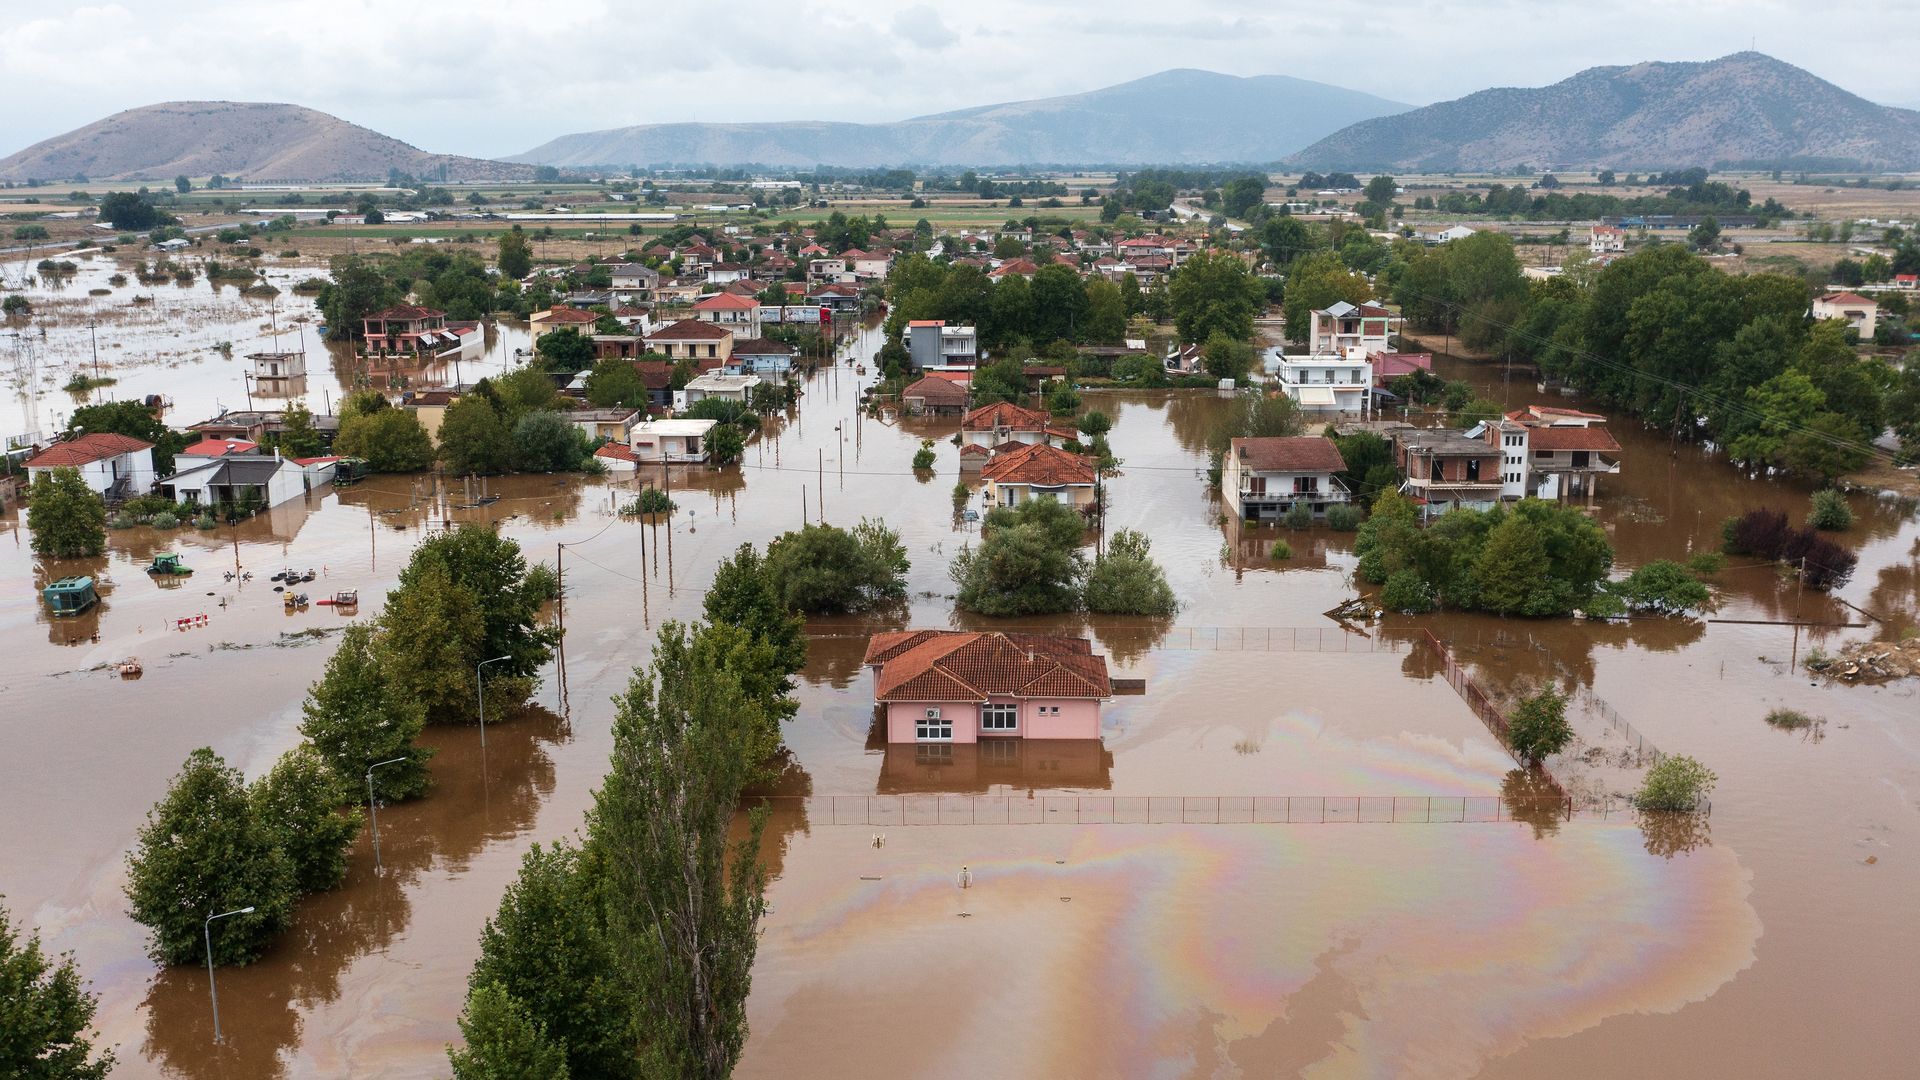 Flooding in Greece in early September after record-breaking rainfall.